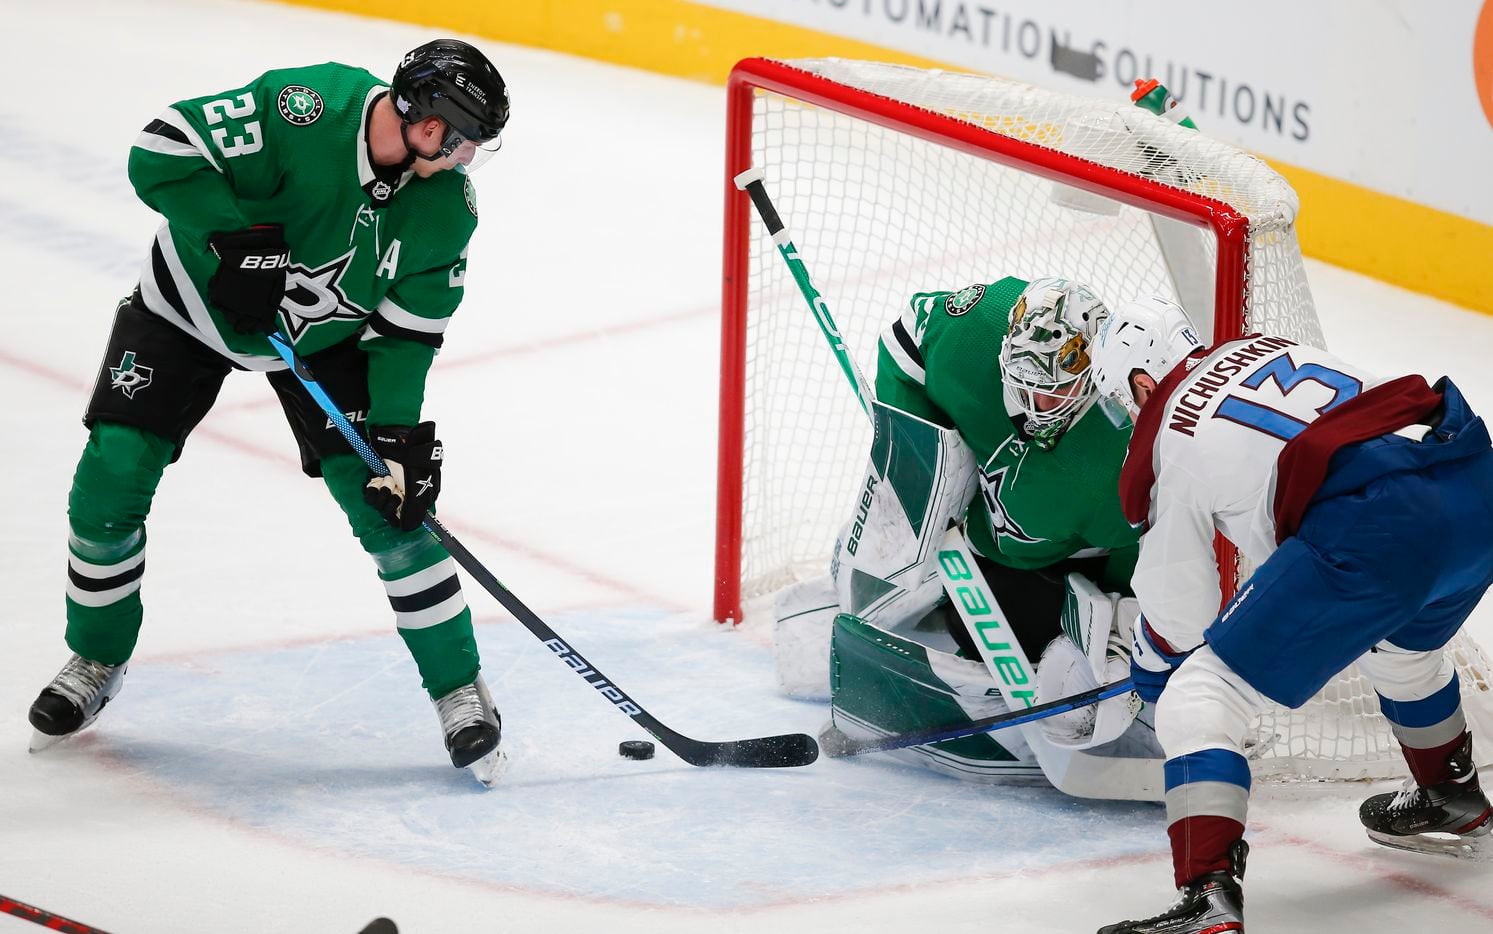 Colorado Avalanche forward Valeri Nichushkin (13) looks for the rebound as Dallas Stars defenseman Esa Lindell (23) and goaltender Jake Oettinger (29) defend during the first period of an NHL hockey game in Dallas, Friday, November 26, 2021. (Brandon Wade/Special Contributor)